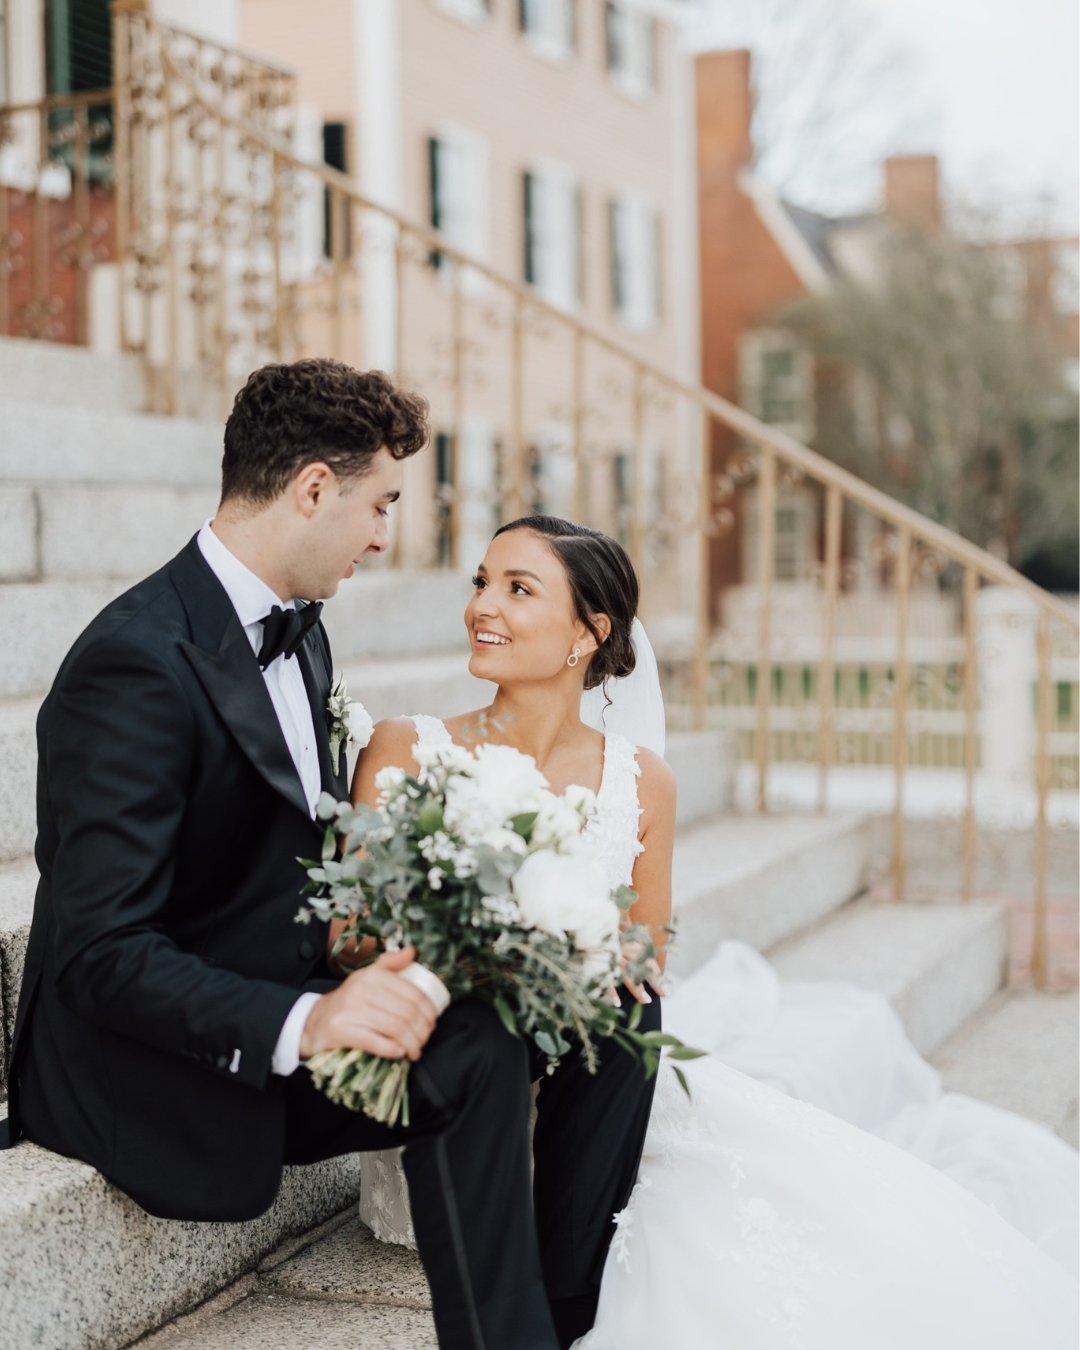 Still swooning over these sweethearts and reliving Laura and Nick's perfect day ♡ 

#newengland #newenglandwedding #newenglandweddingplanner #salem #2024bride #2024wedding